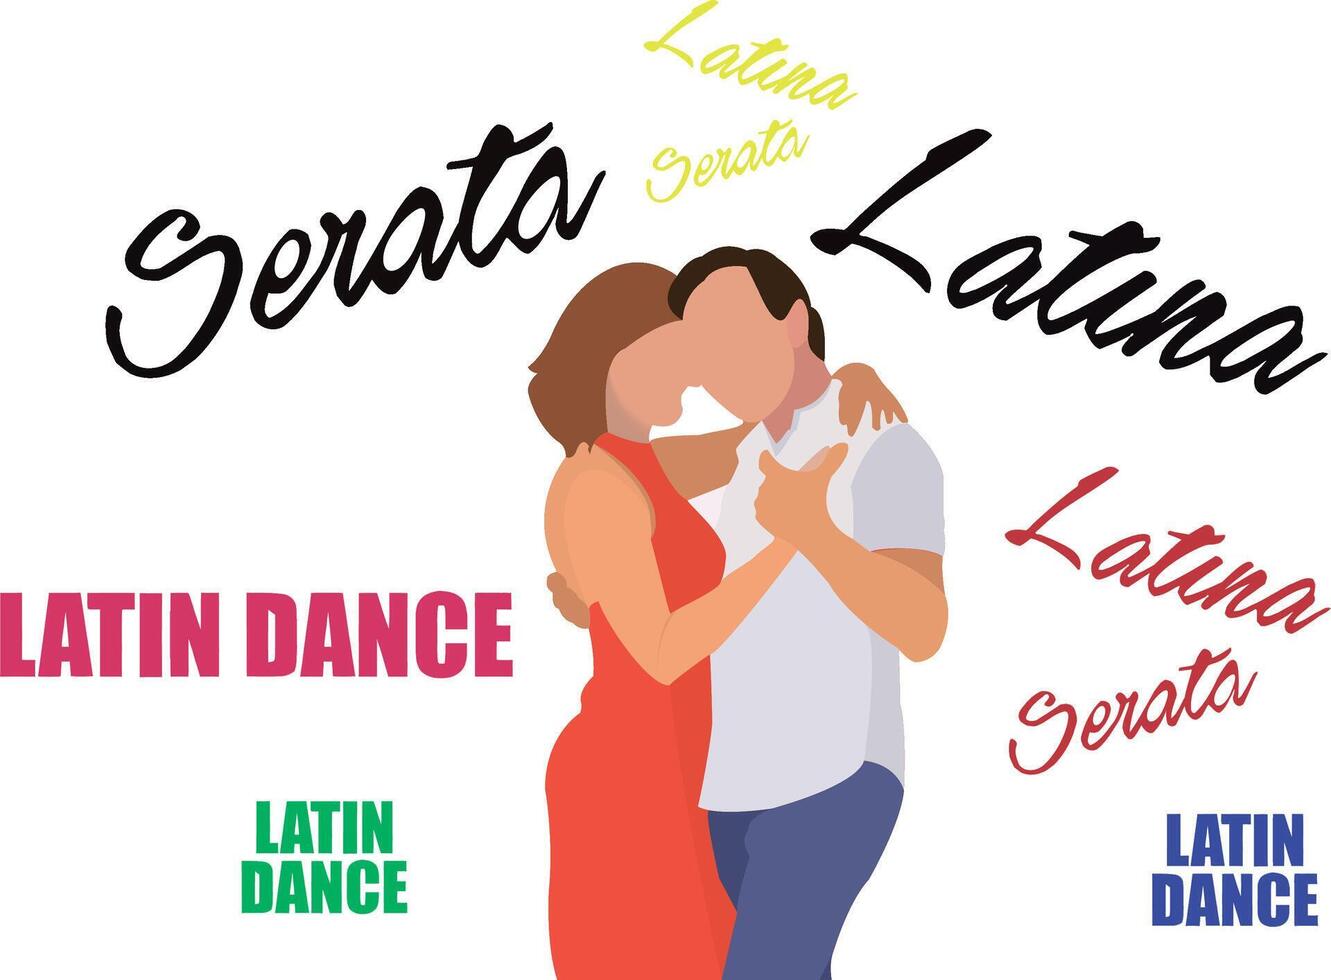 Latin dance passion - couple in embrace vector